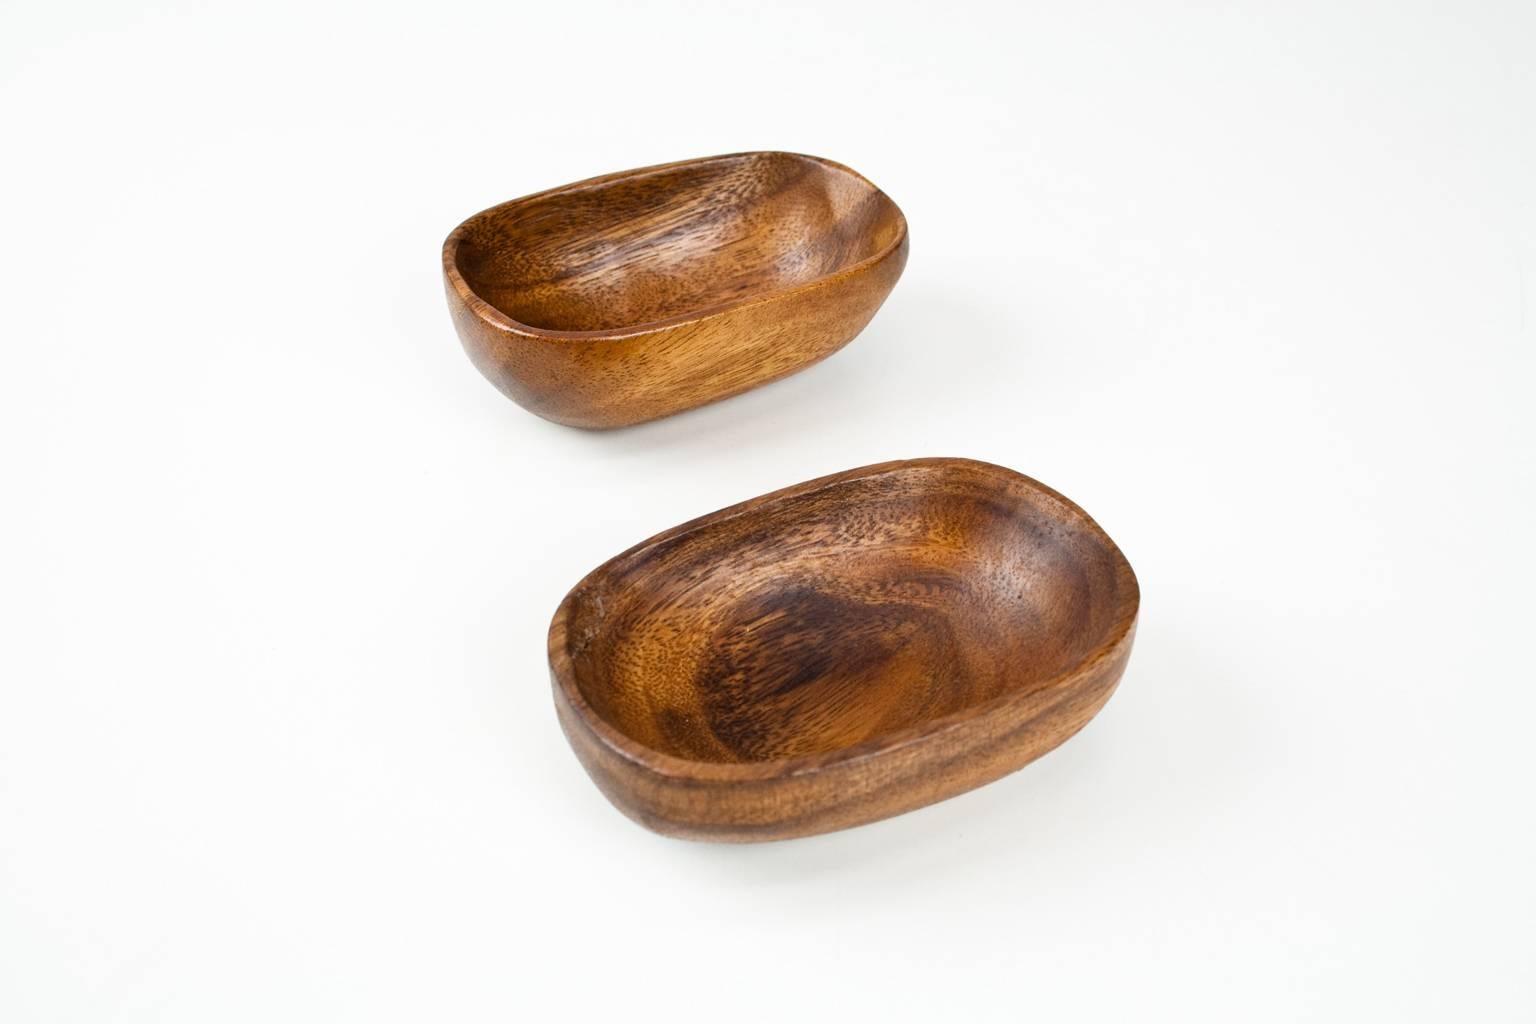 Lovely small teak handmade, sculptured Danish bowls to use for small objects, such as keys, jewelry or as desk accessories. Is sold as set.